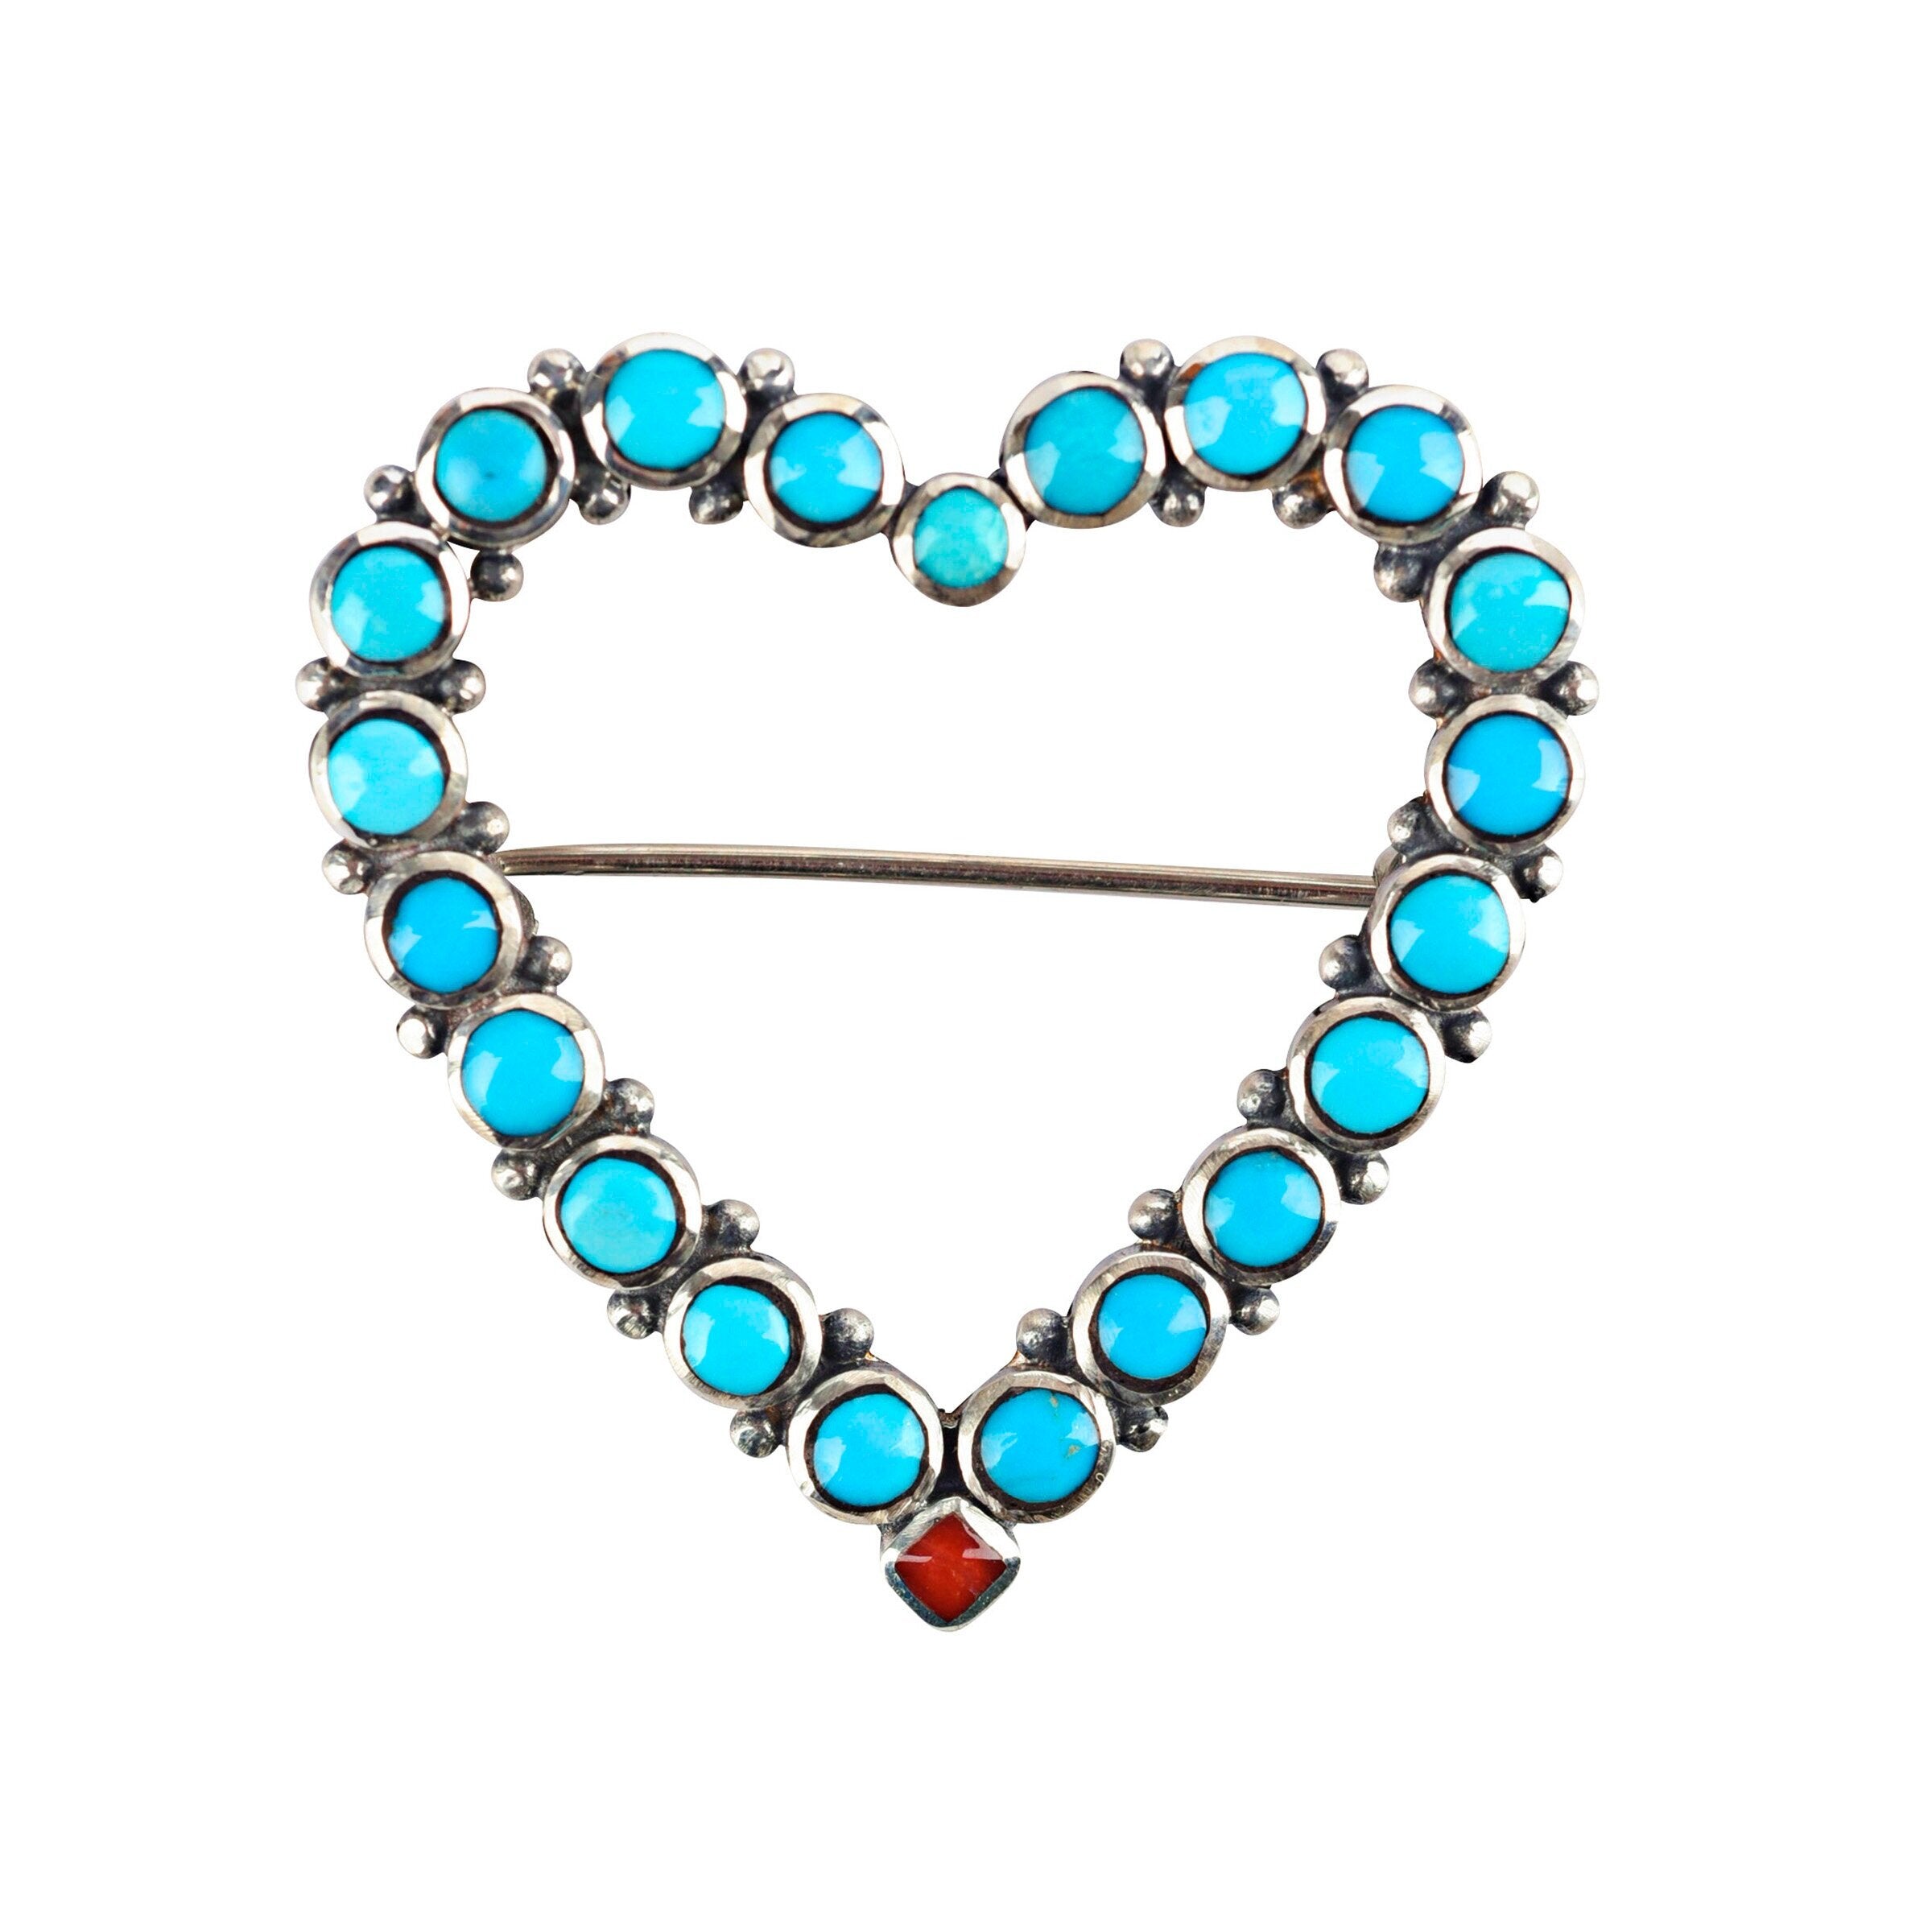 Turquoise Heart Pin